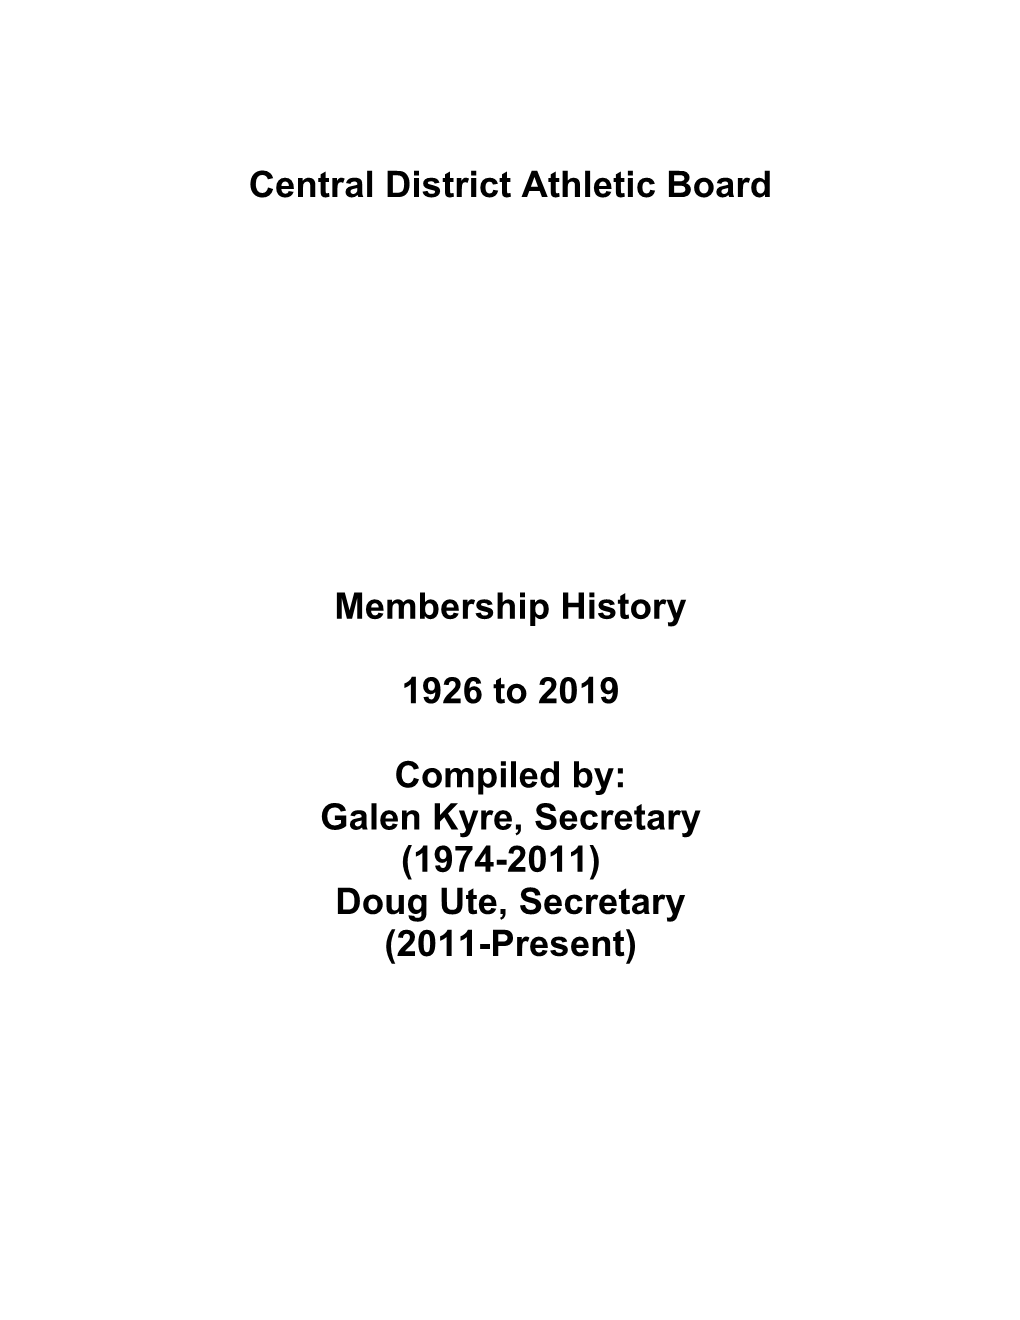 Central District Athletic Board Membership History 1926